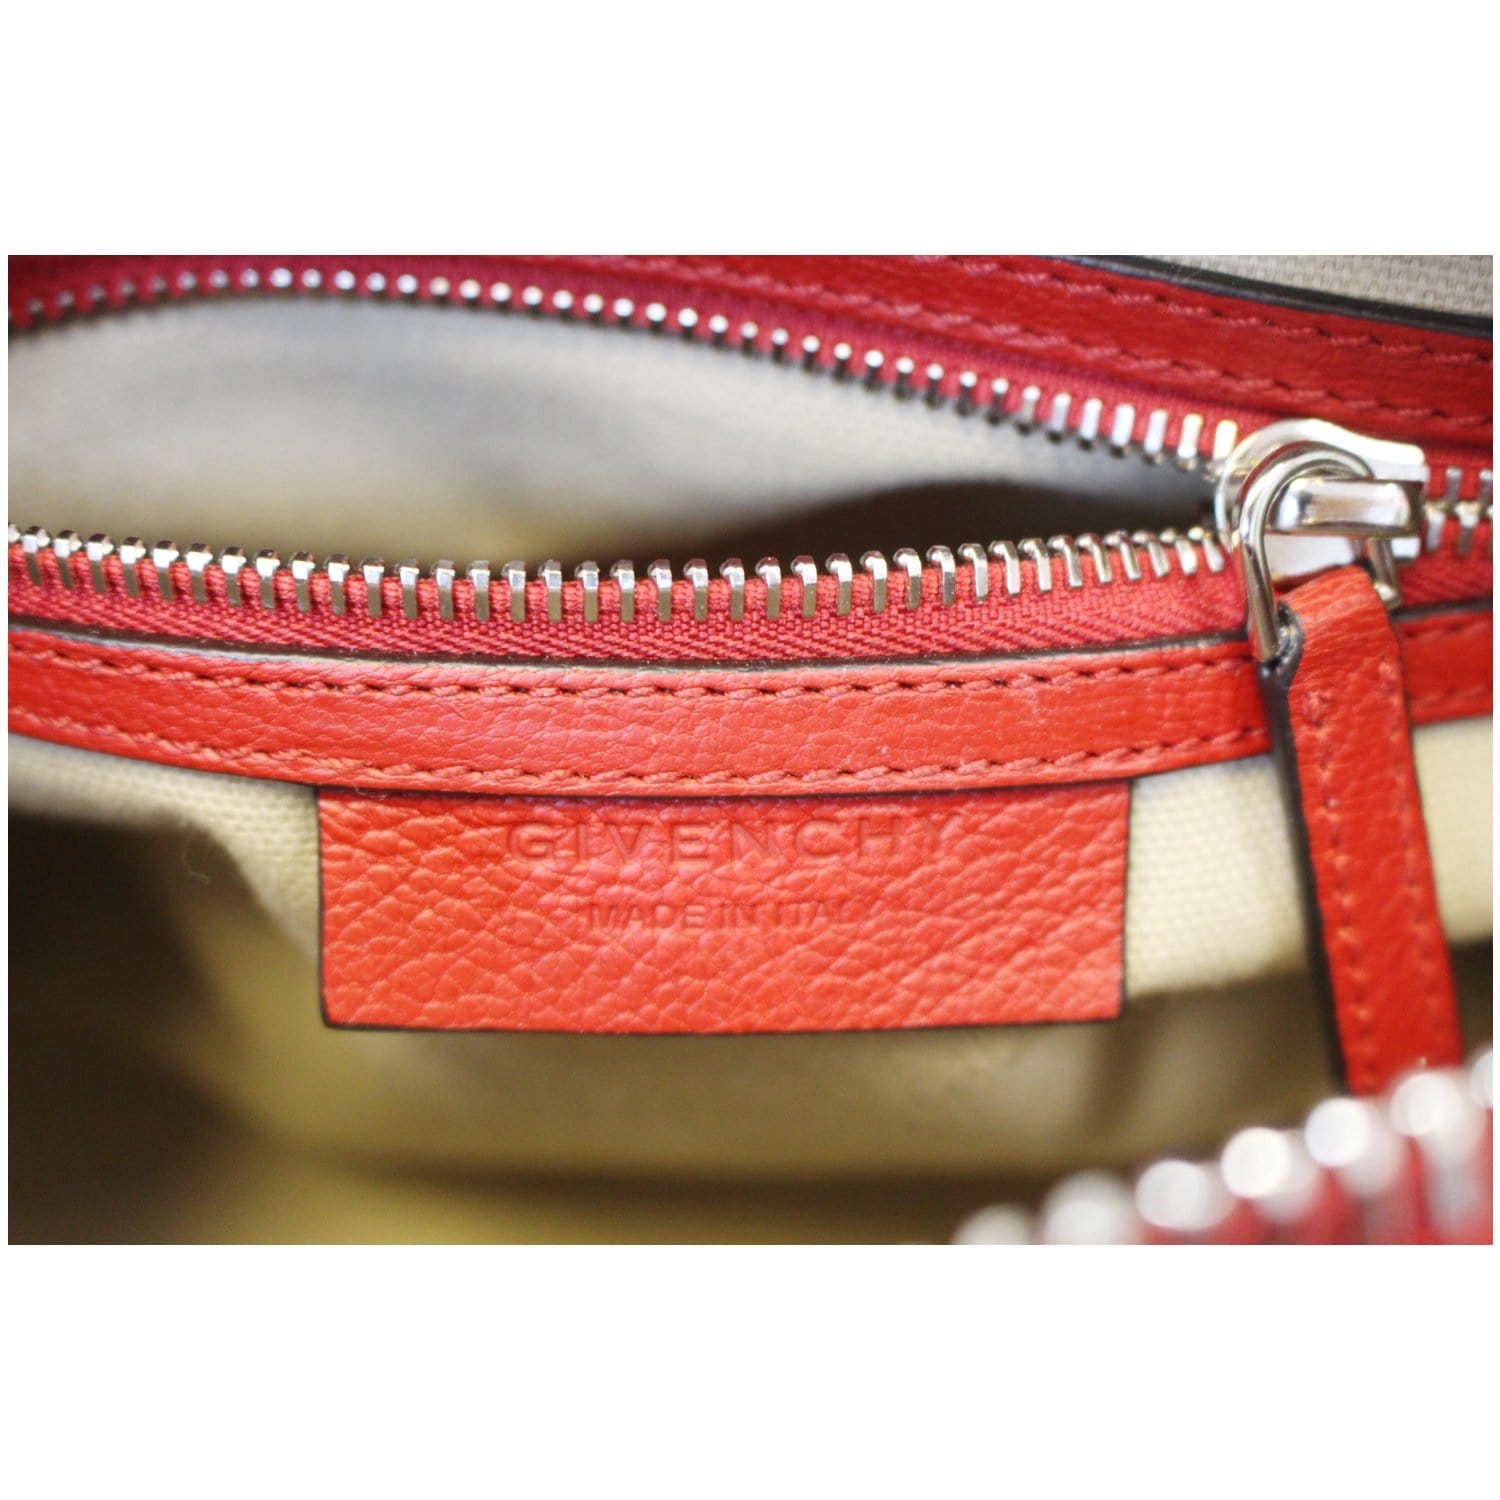 Givenchy Red Leather Antigona Micro Shoulder Bag *Pre Owned* FREE SHIPPING